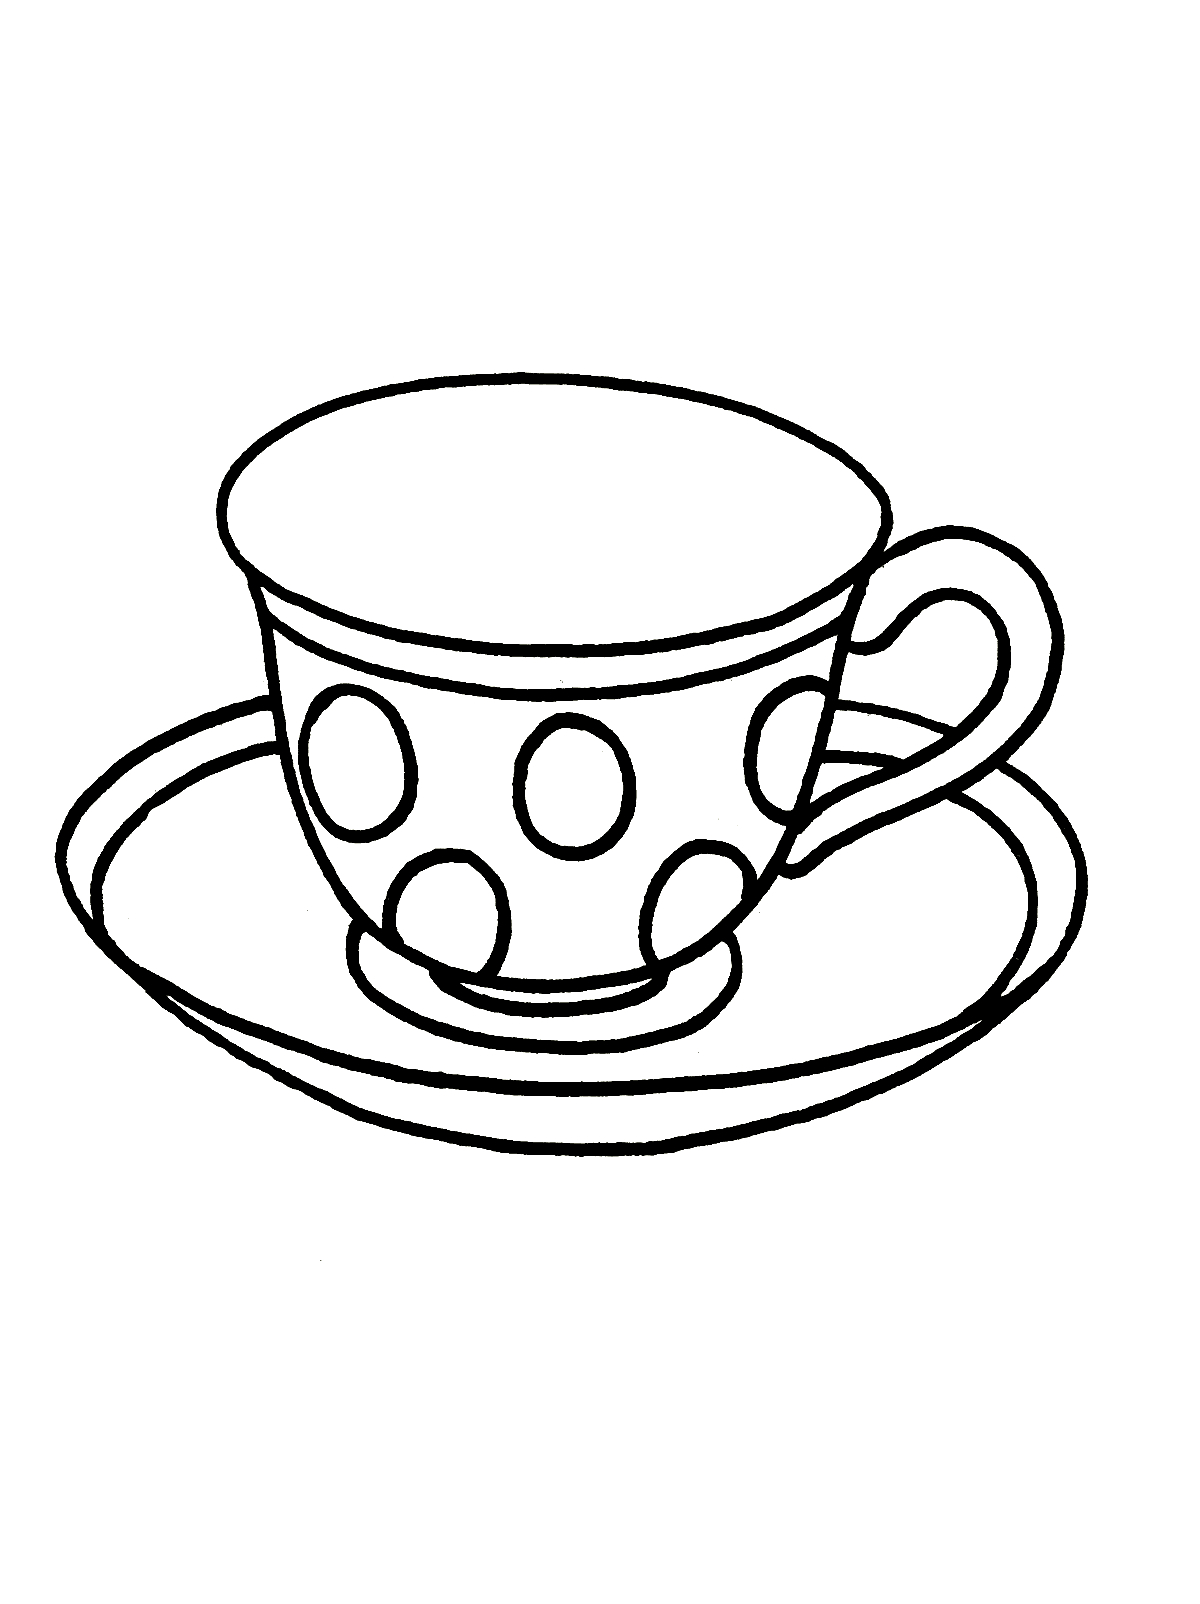 Teacup Coloring Pages To Print Cup Coloring Pages To Download And Print For Free